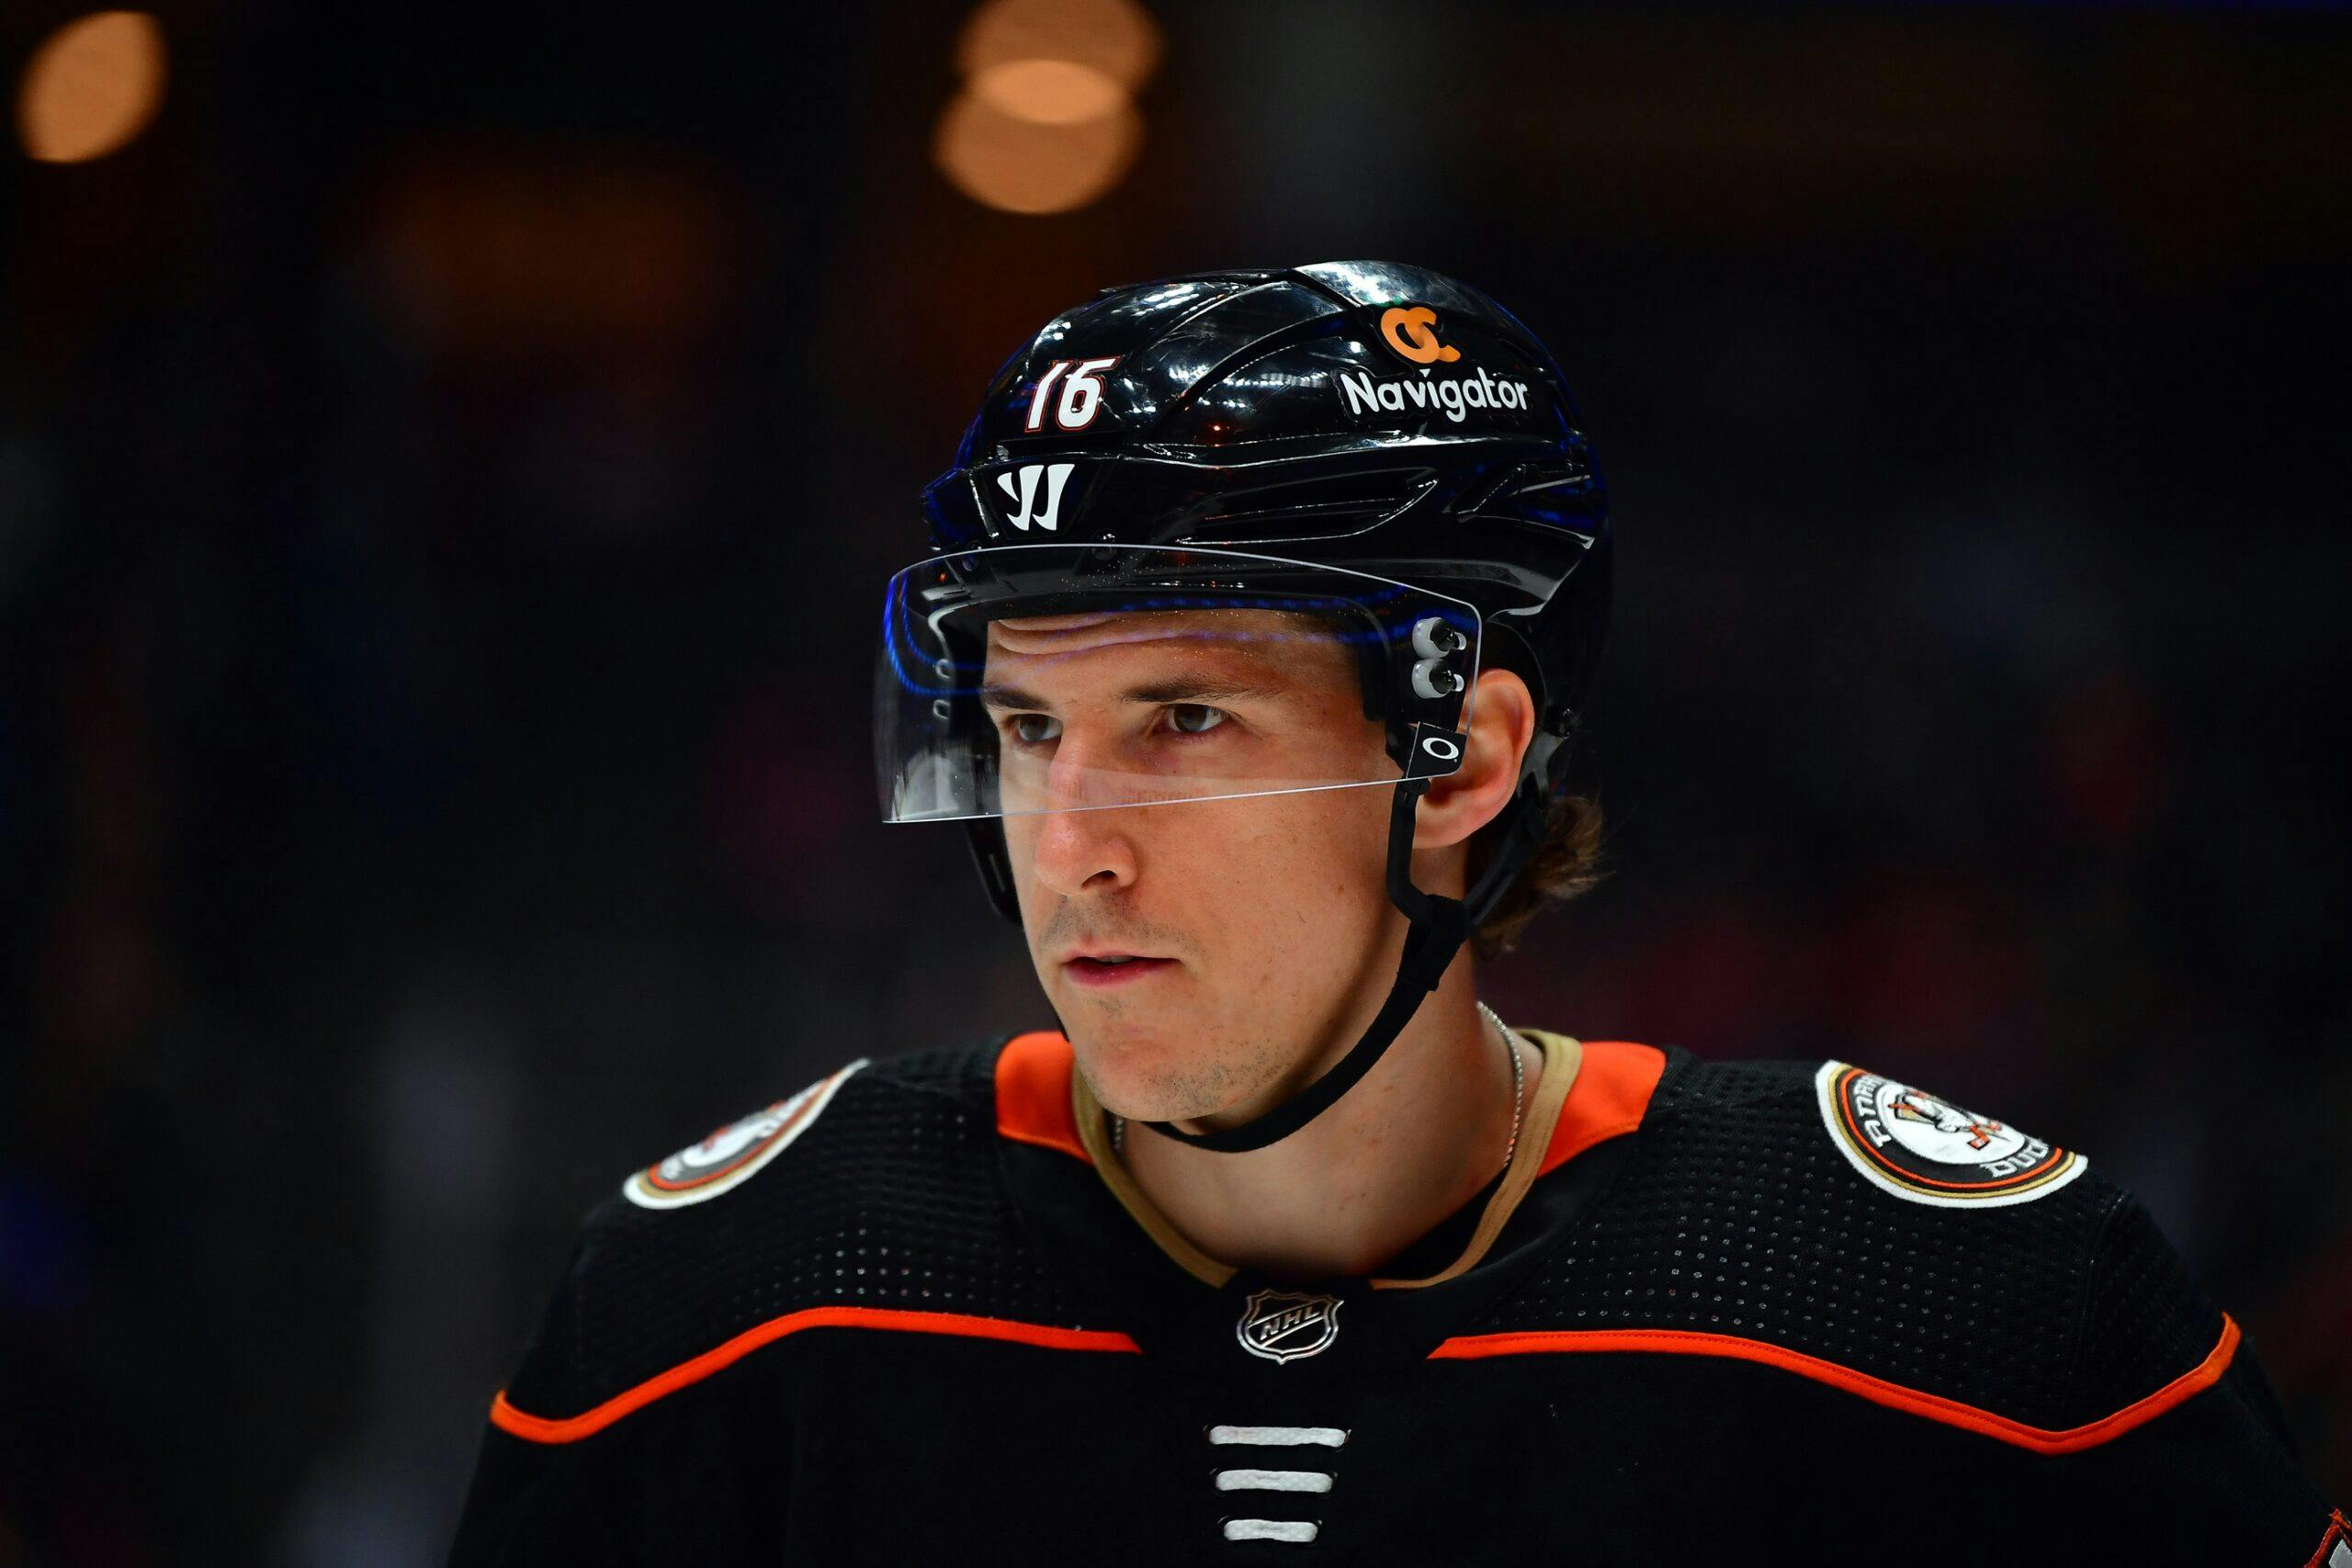 Anaheim Ducks forward Ryan Strome fined $5,000 for unsportsmanlike conduct